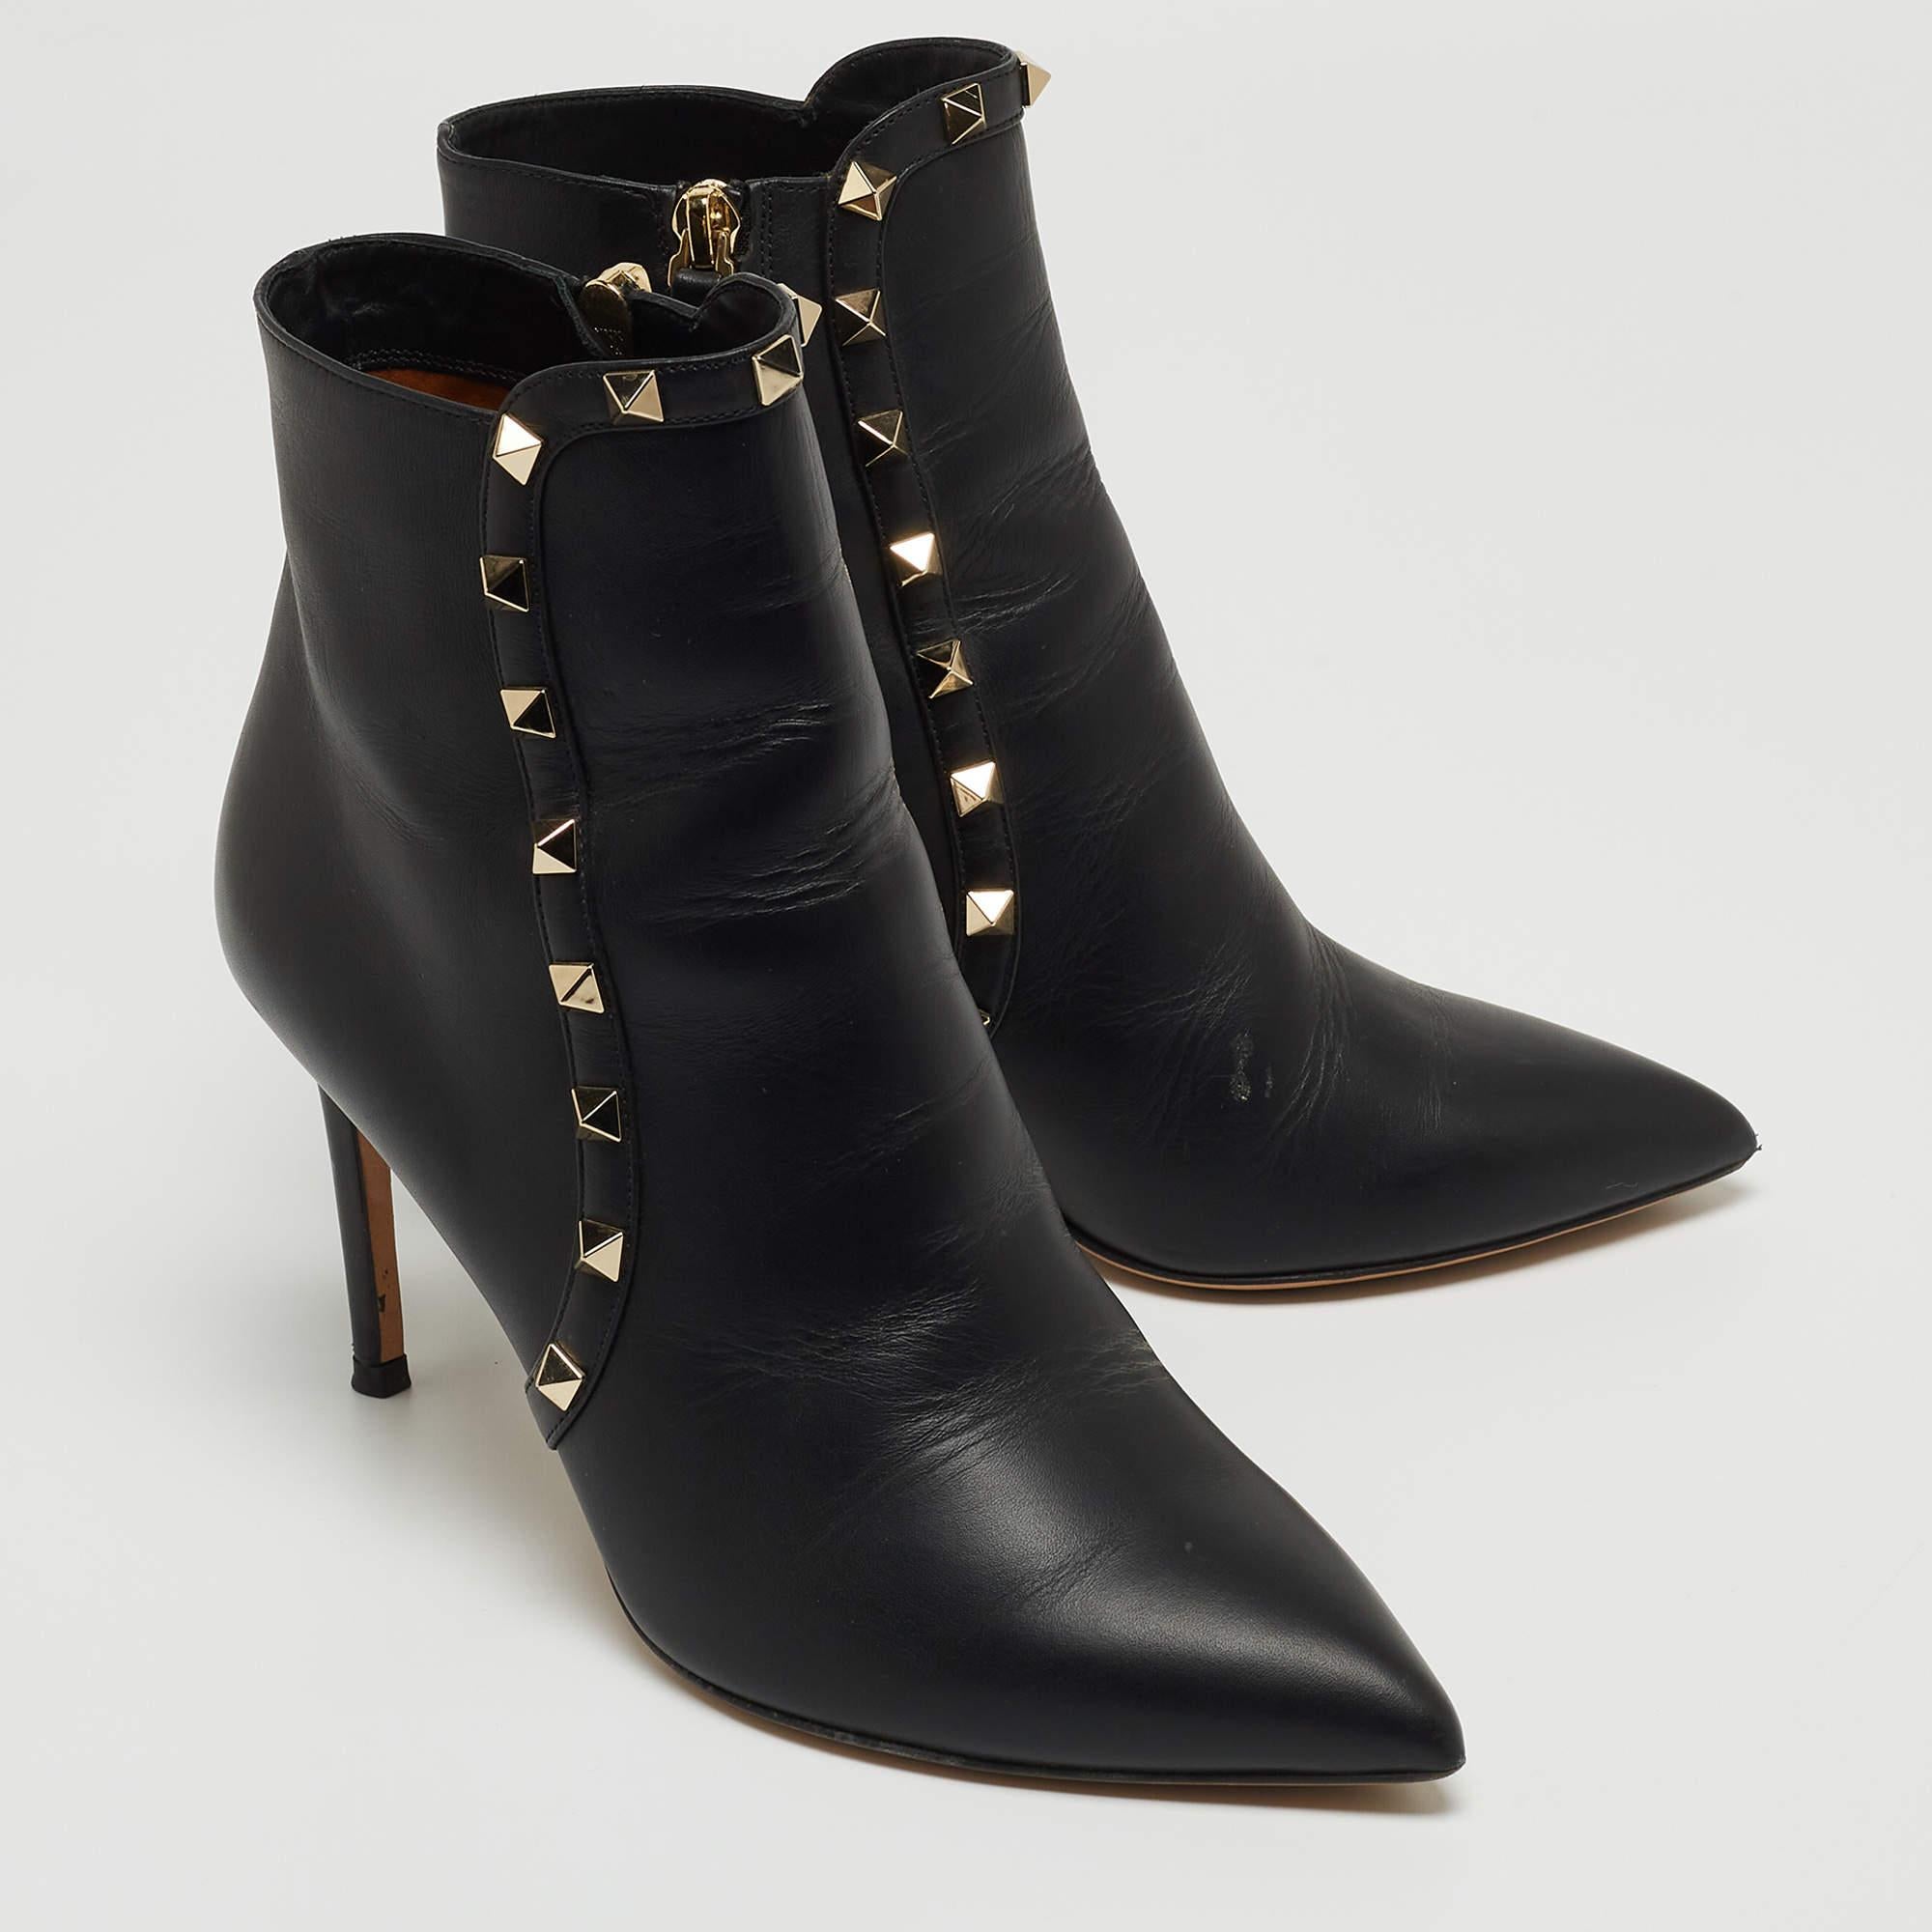 Valentino Black Leather Rockstud Pointed Toe Boots Size 37 1